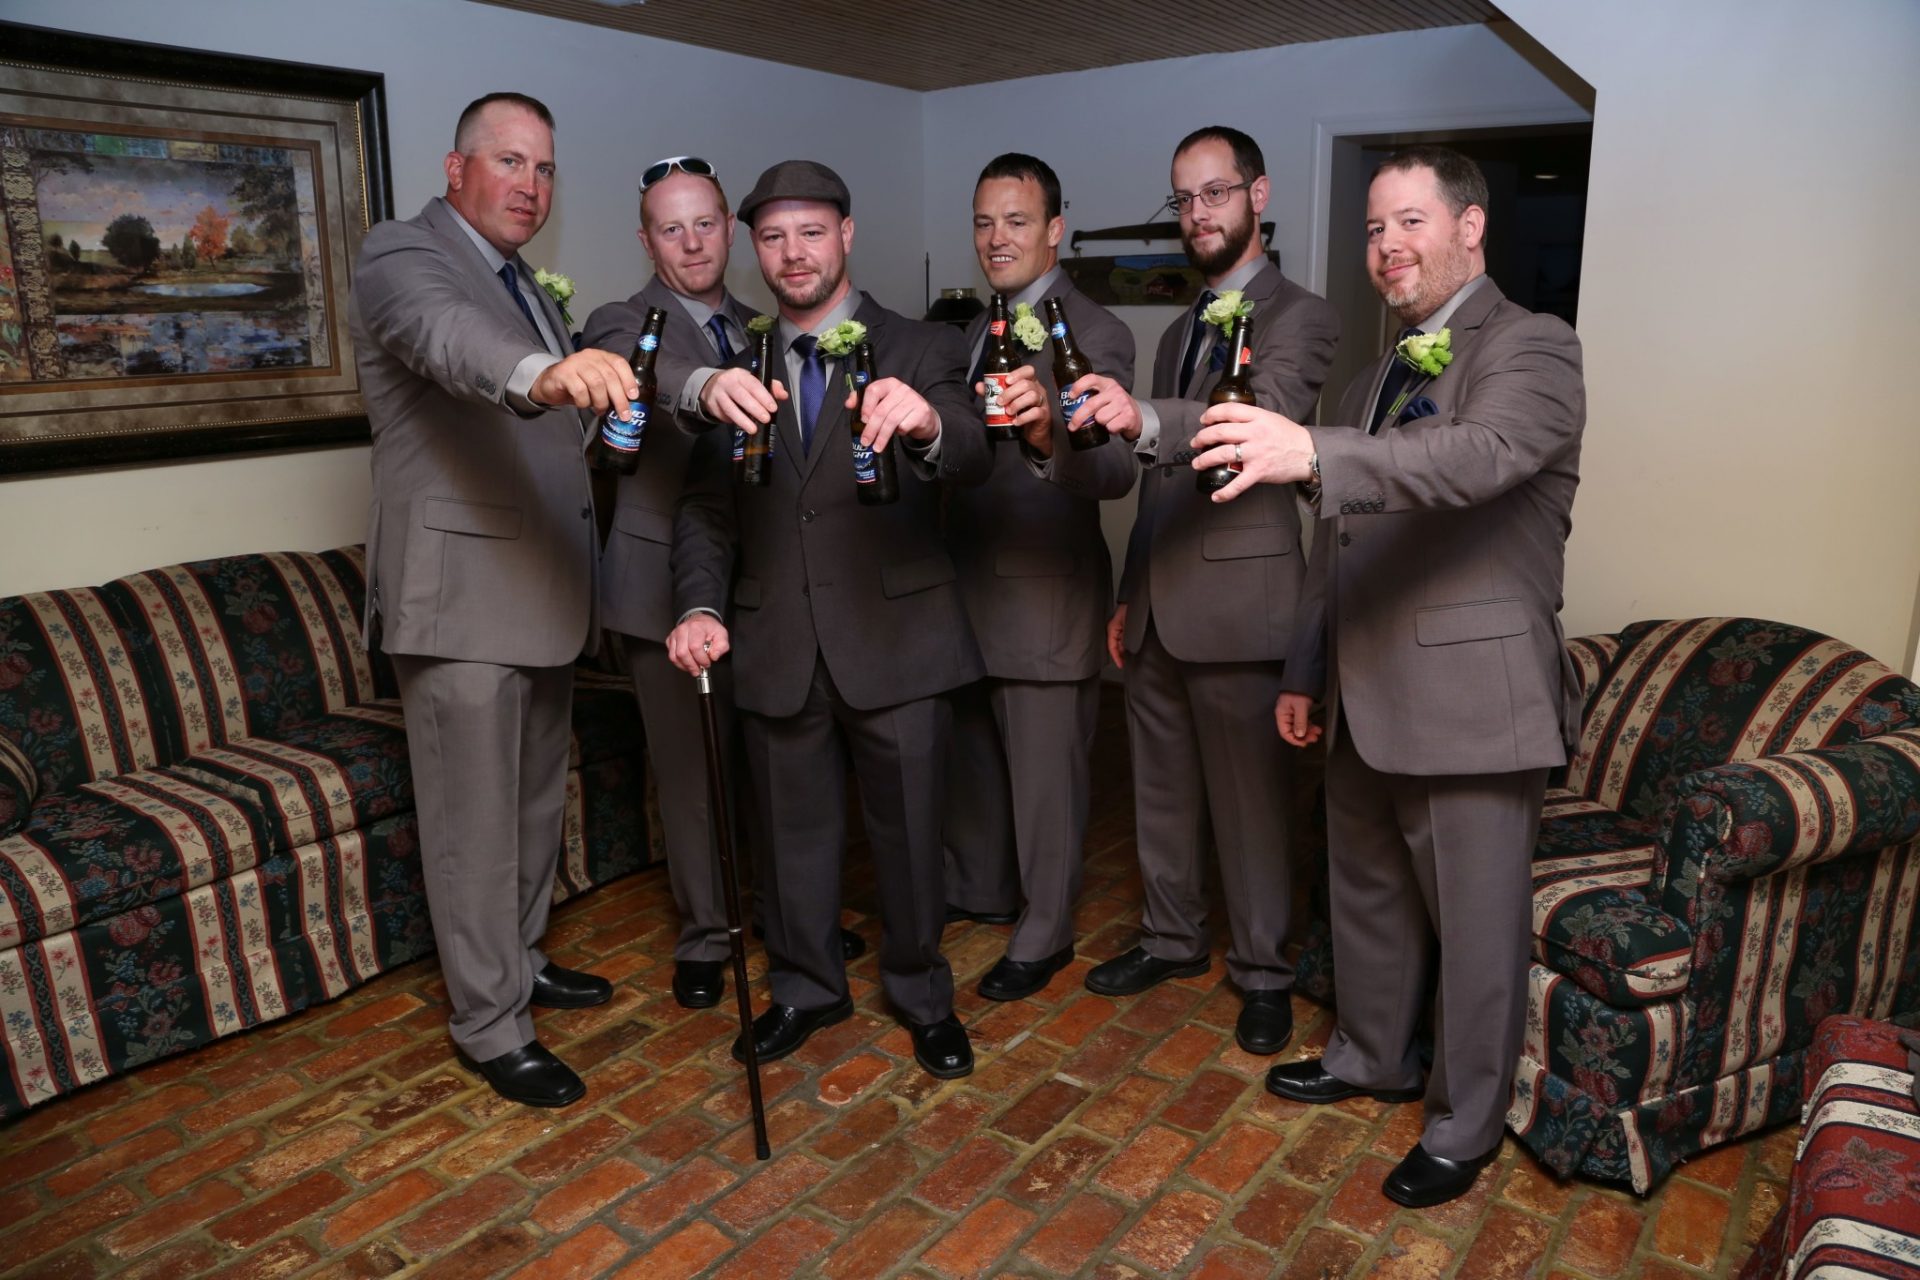 Celebrating in the groom's room before Maryland wedding